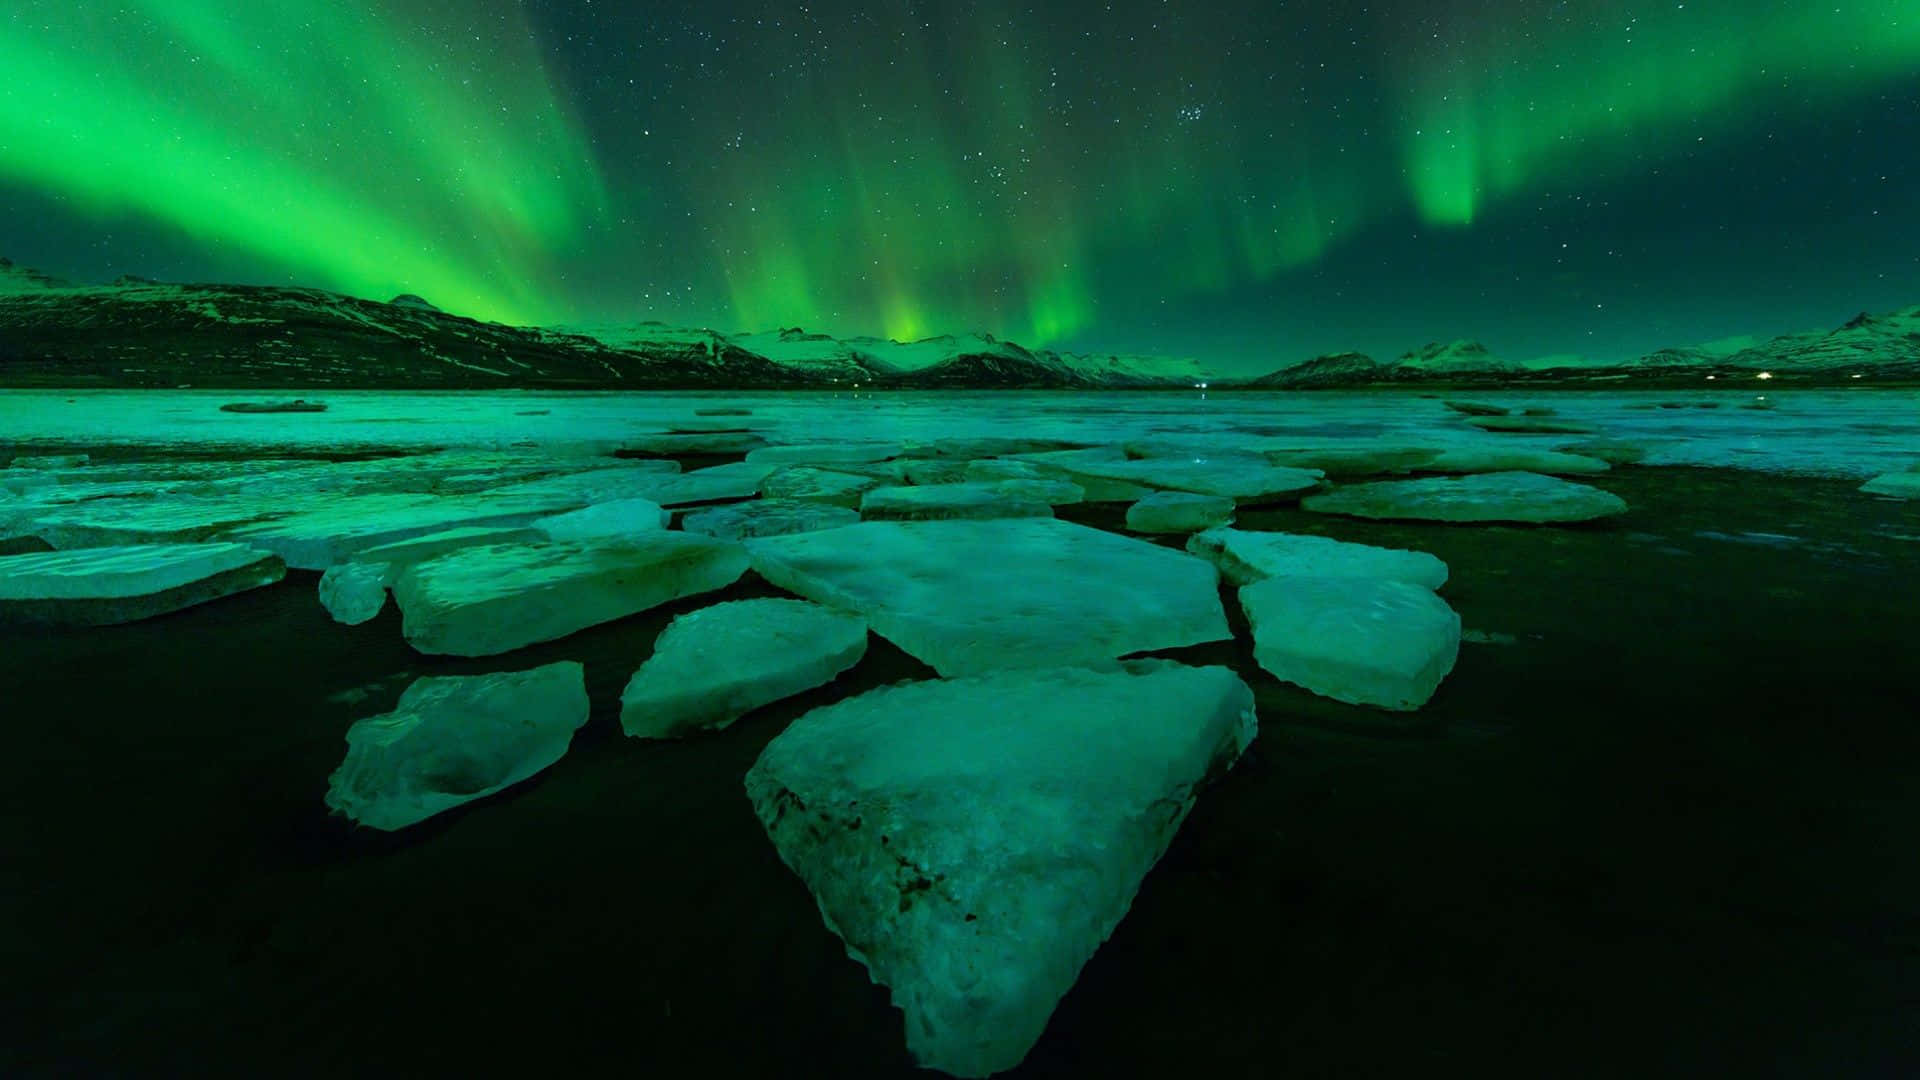 "Witnessing the Spectacle of Nature - Northern Lights"